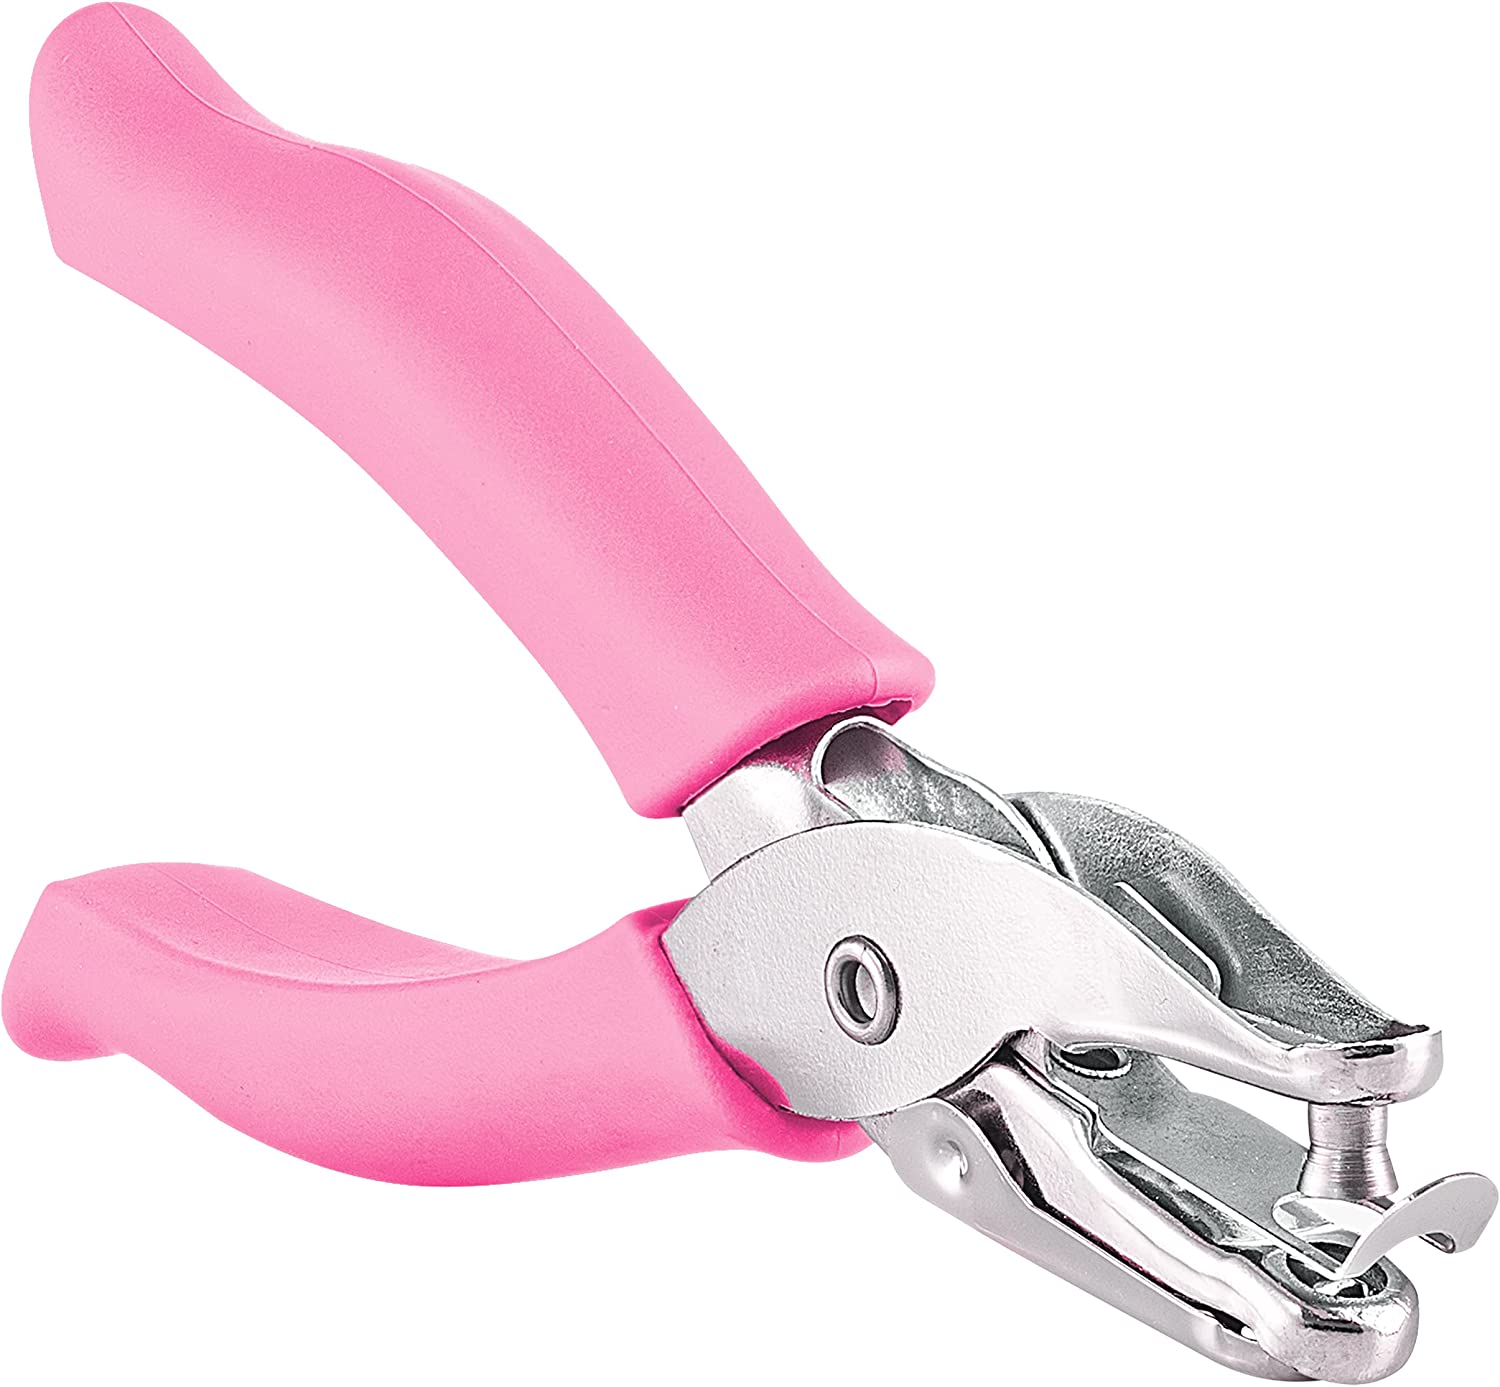 Enday Single-Hole Puncher, Pink